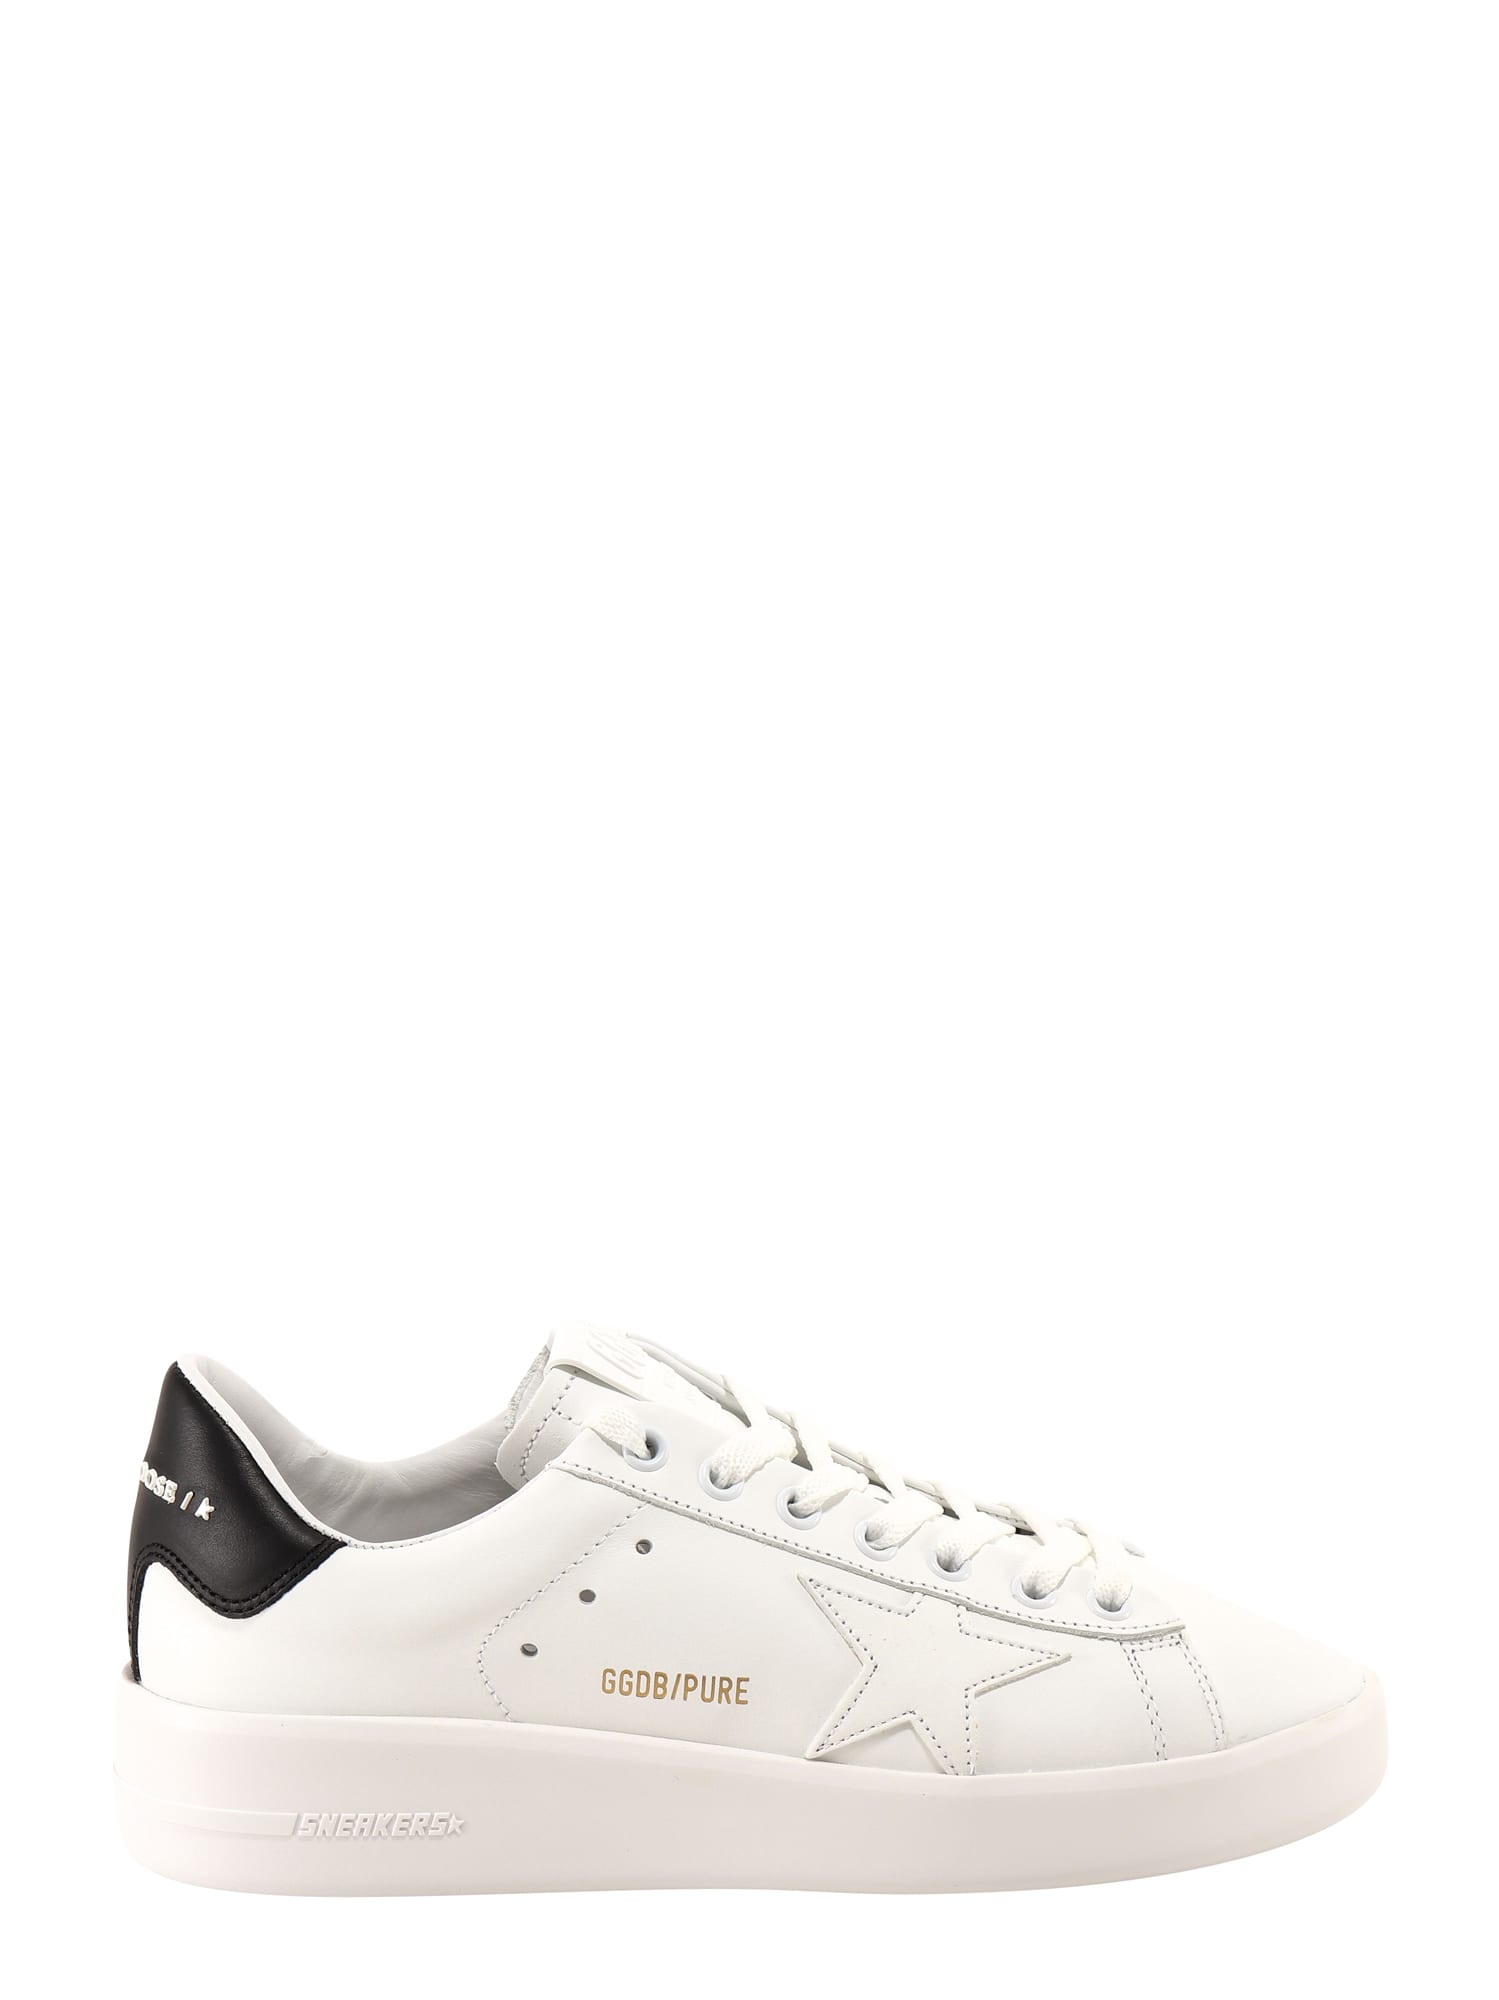 Shop Golden Goose Pure New Sneakers In White/black